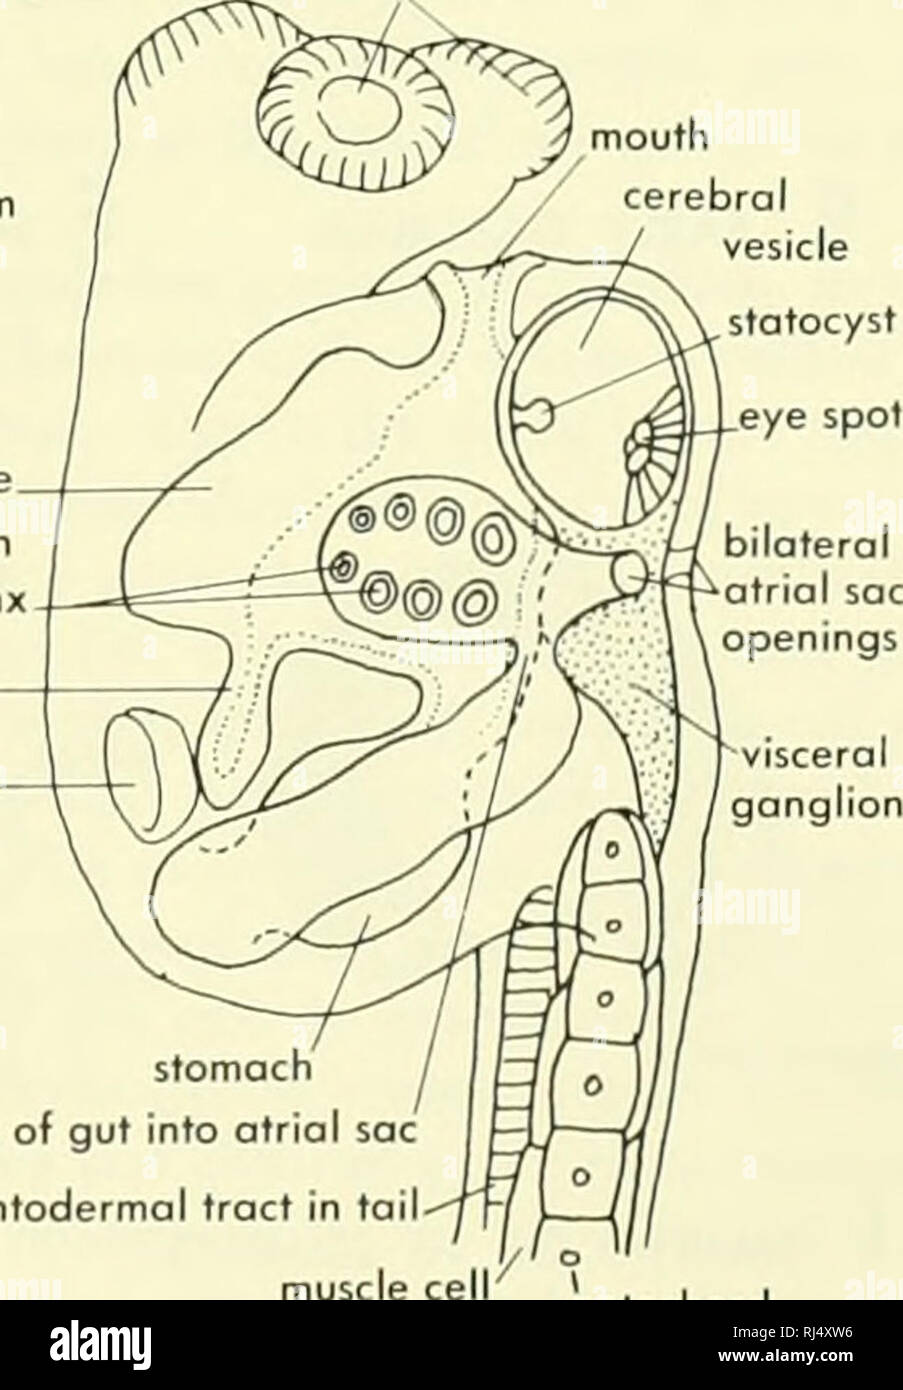 . Chordate morphology. Morphology (Animals); Chordata. endostyle openings between atrium and pharynx epicardium heart. entoderm. stomach opening of gut into atrial sac entodermal tract in tail muscle ce EARLY NEURULA H LATE NEURULA notochord LARVA AT HATCHING Figure 7-5. Early stages of the tunicate, C/ave//no. A, egg with follicular wall and envelope of perivitelline cells; B, 2-cell stage; C, 8-cell stage; D, blastulo with arrow indicating axis and future dorsal and ventral aspects; E, sagittal section of gastrula with anterior end to left and dorsal side up; F, cross section through E; G, s Stock Photo